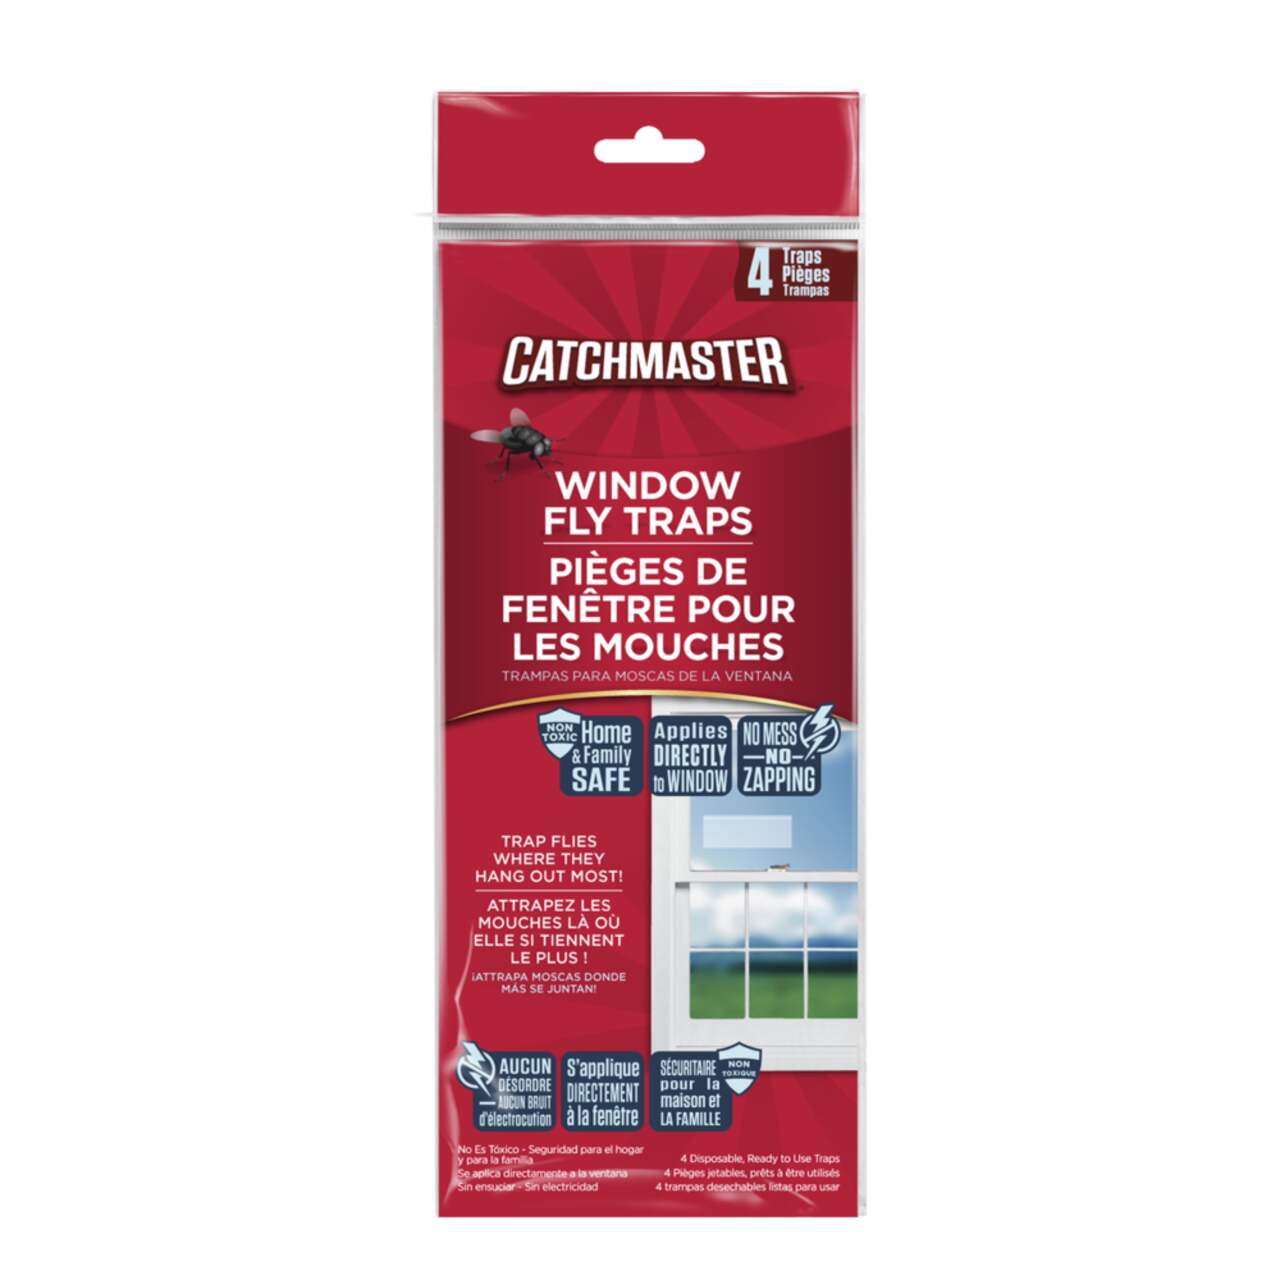 https://media-www.canadiantire.ca/product/seasonal-gardening/gardening/weed-insect-rodent-control/0599341/catchmaster-window-fly-trap-95502814-08ec-4bec-88ef-7030481b0bd7.png?imdensity=1&imwidth=640&impolicy=mZoom